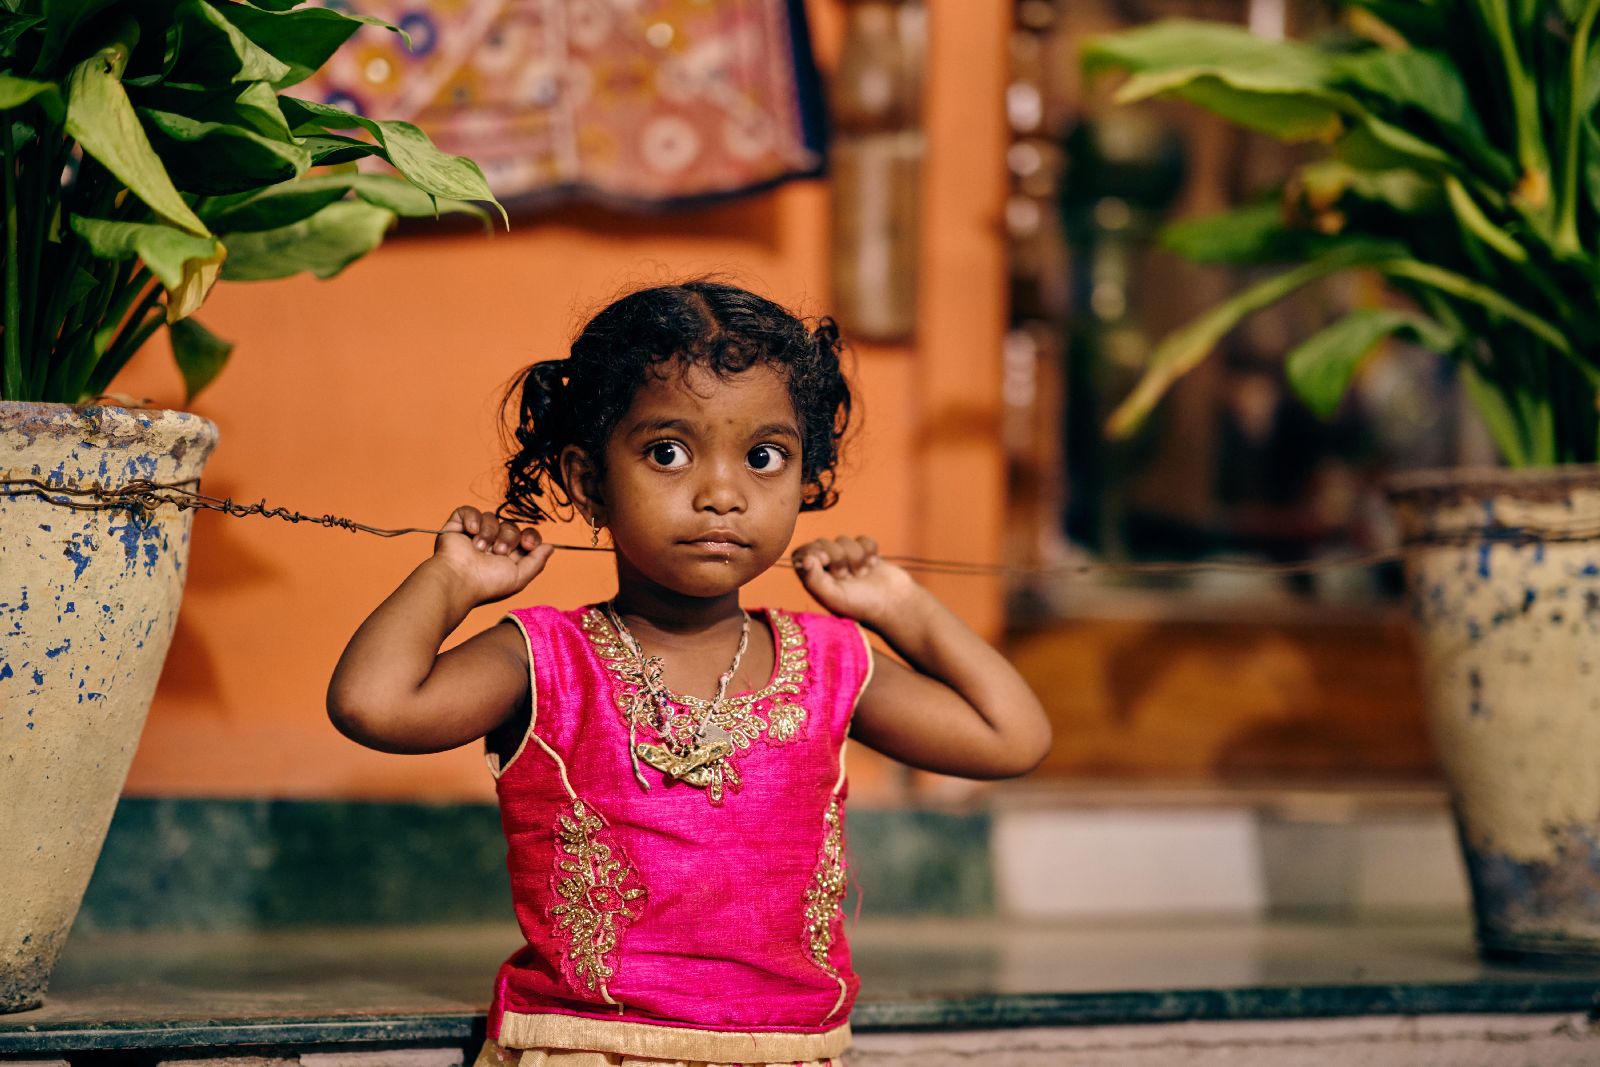 Young girl in bright pink traditional dress in India